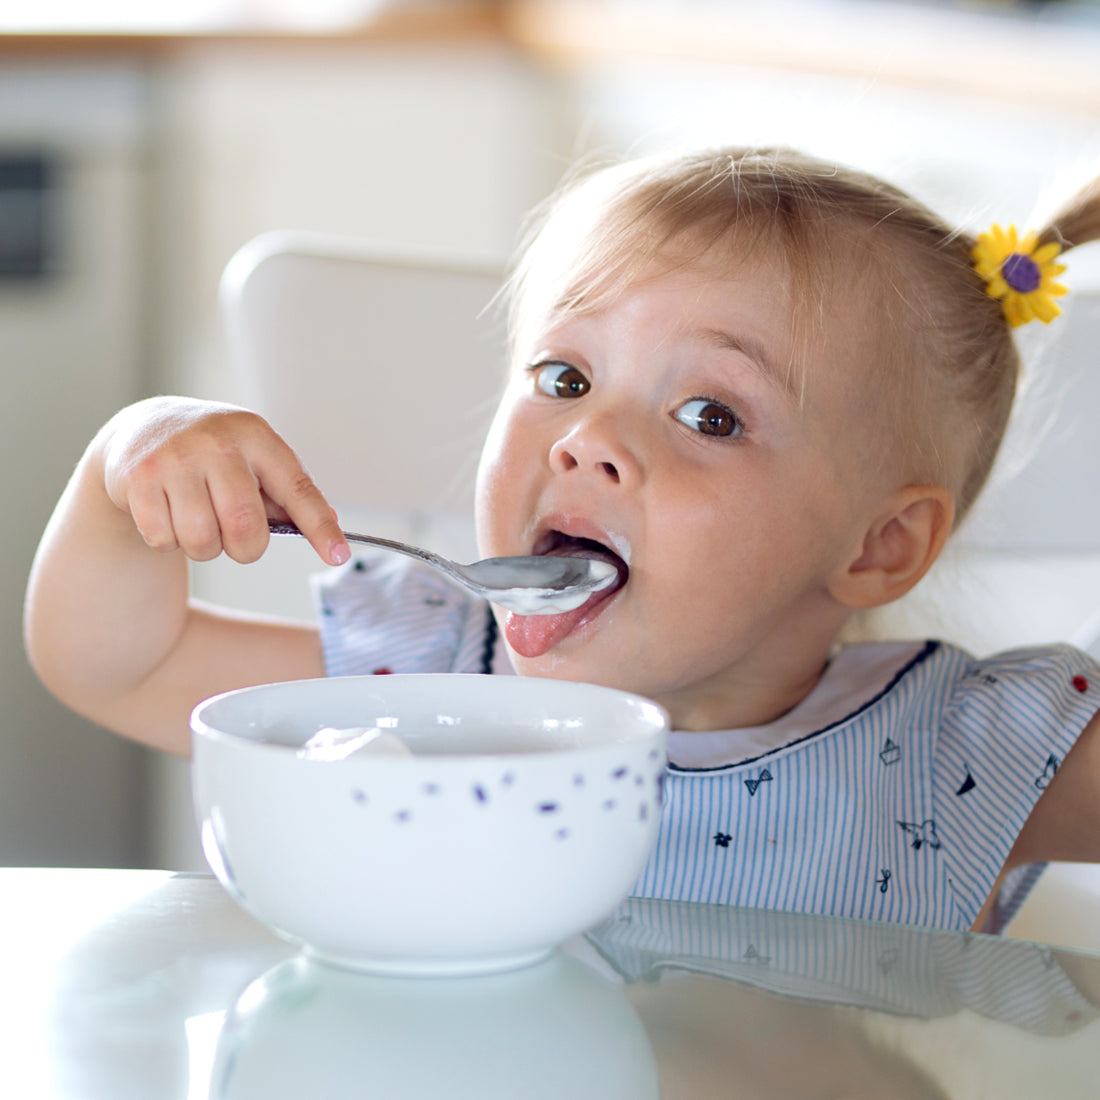 Cute little girl eating with a spoon